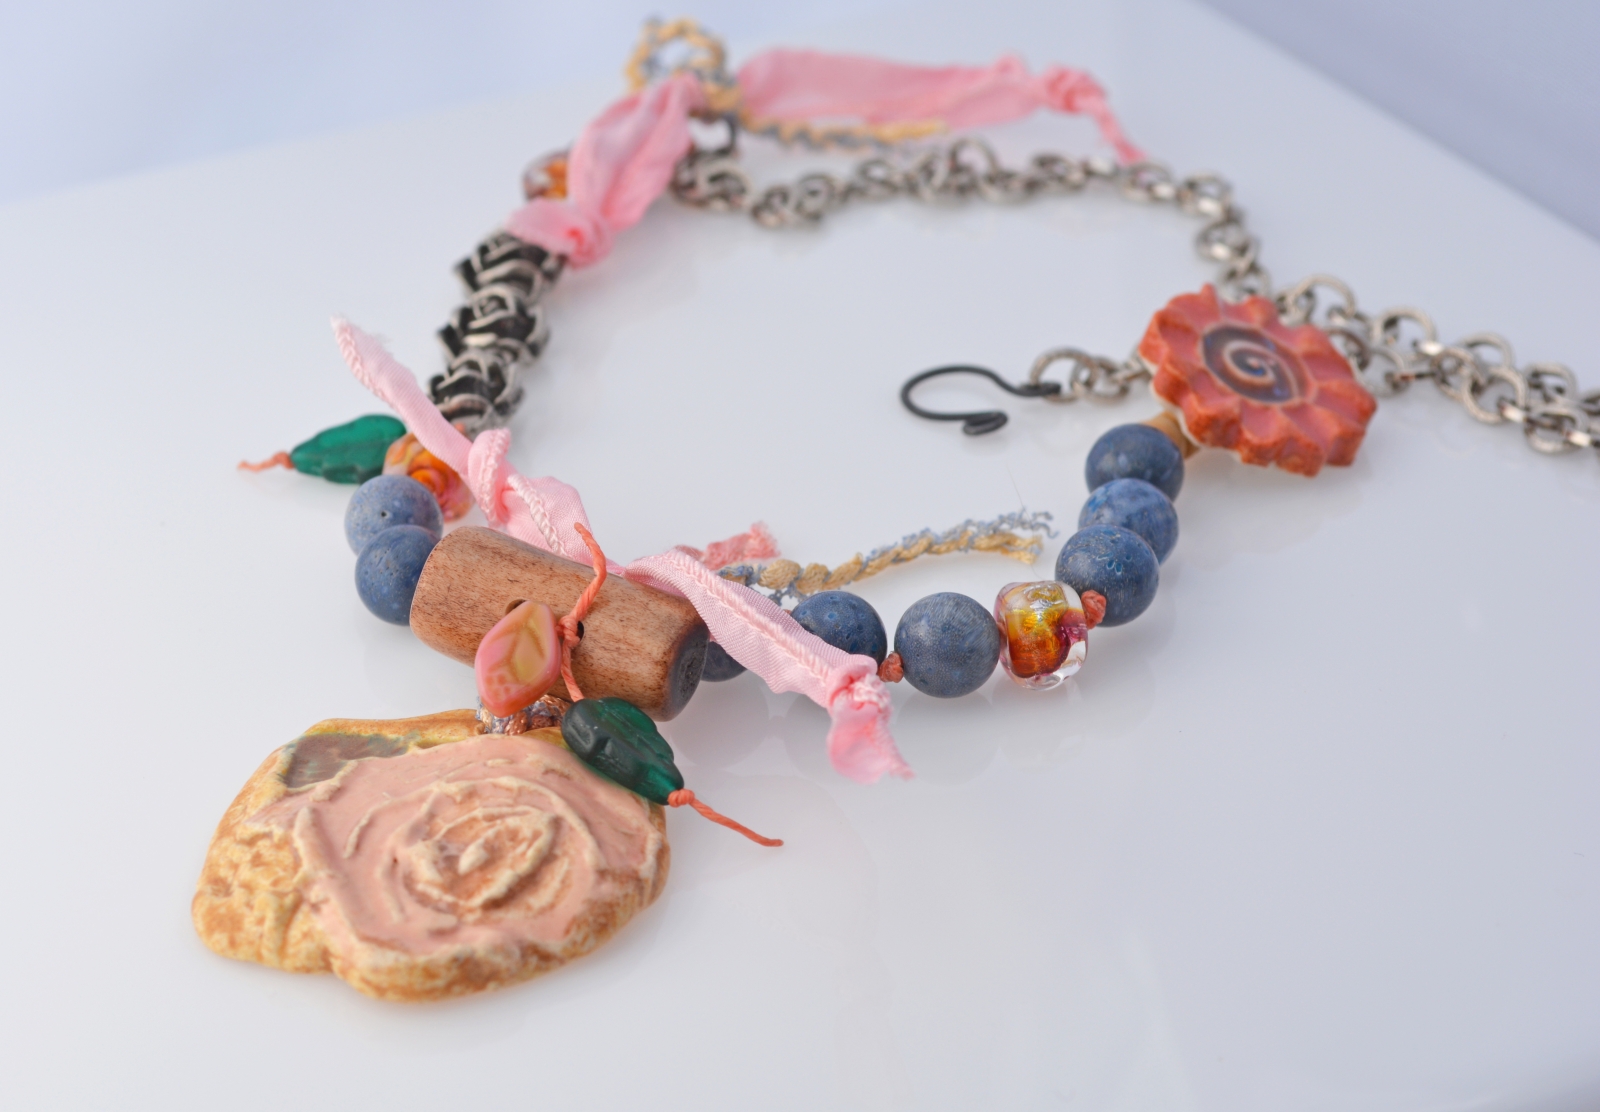 Shabby Chic Rose necklace by Honey from the Bee